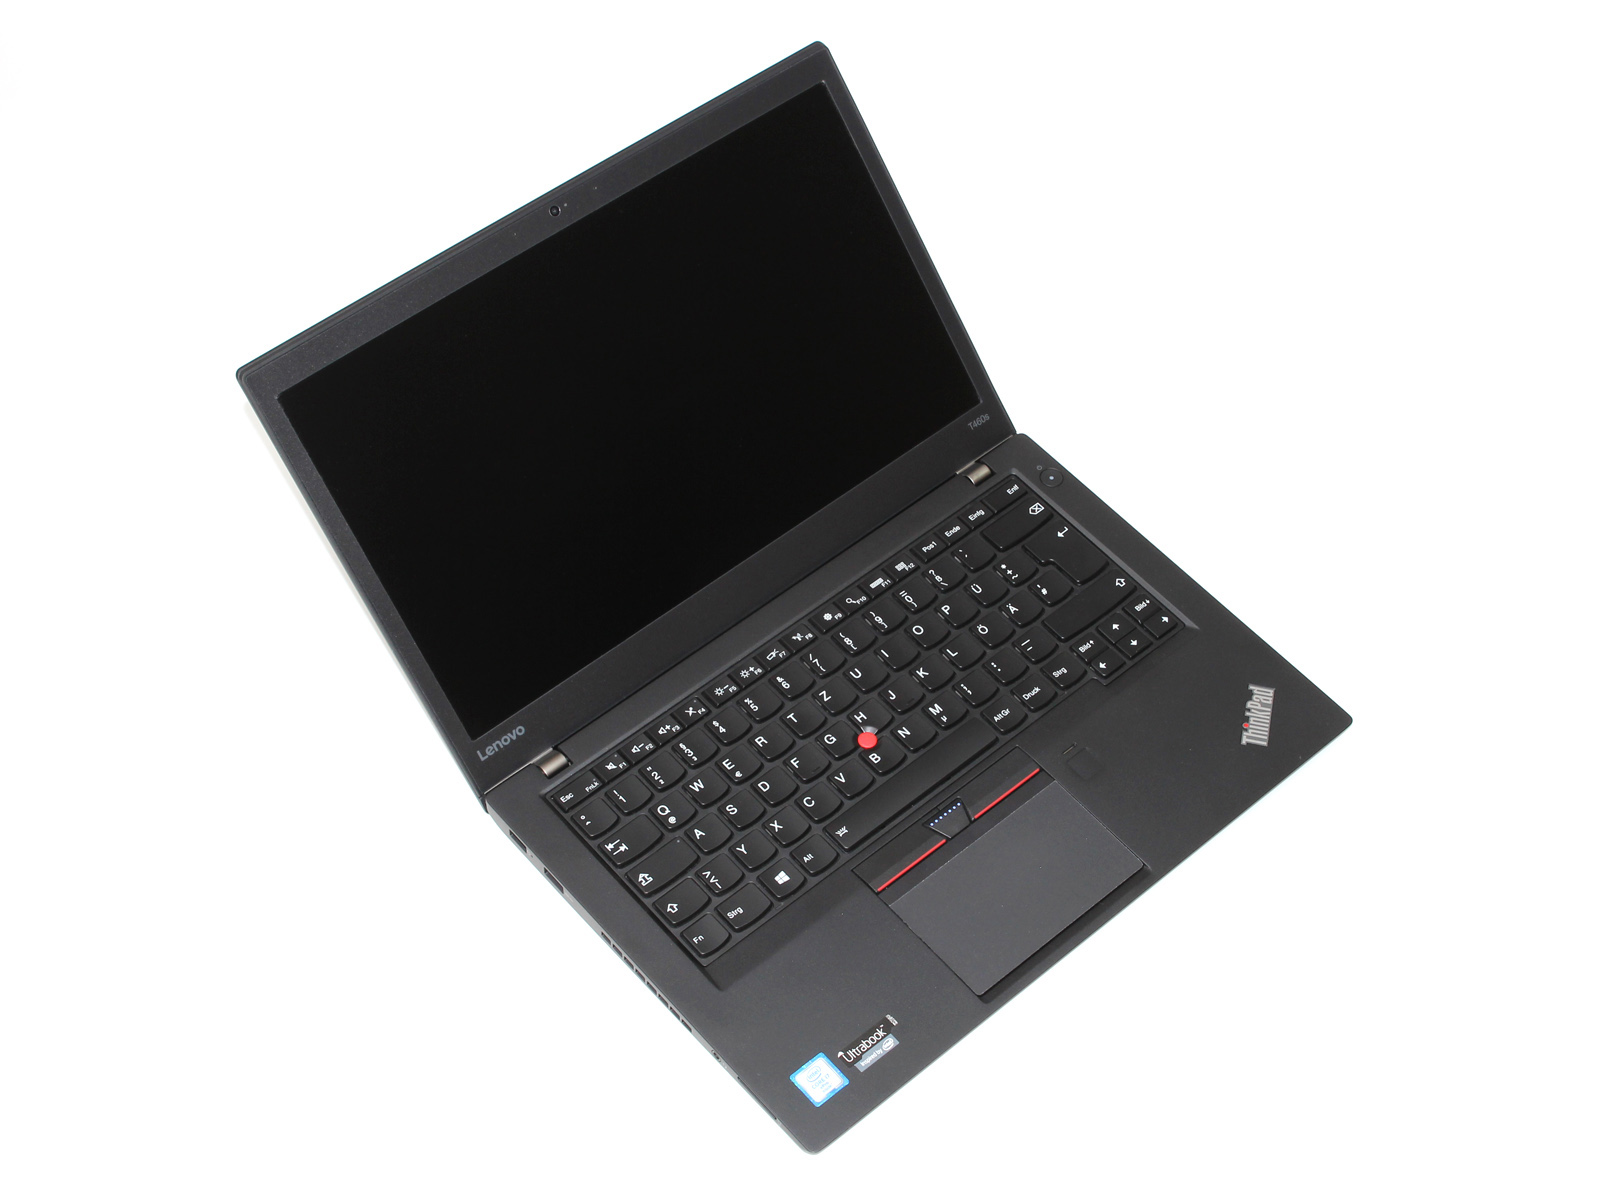 Lenovo thinkpad t460 specifications first care 60